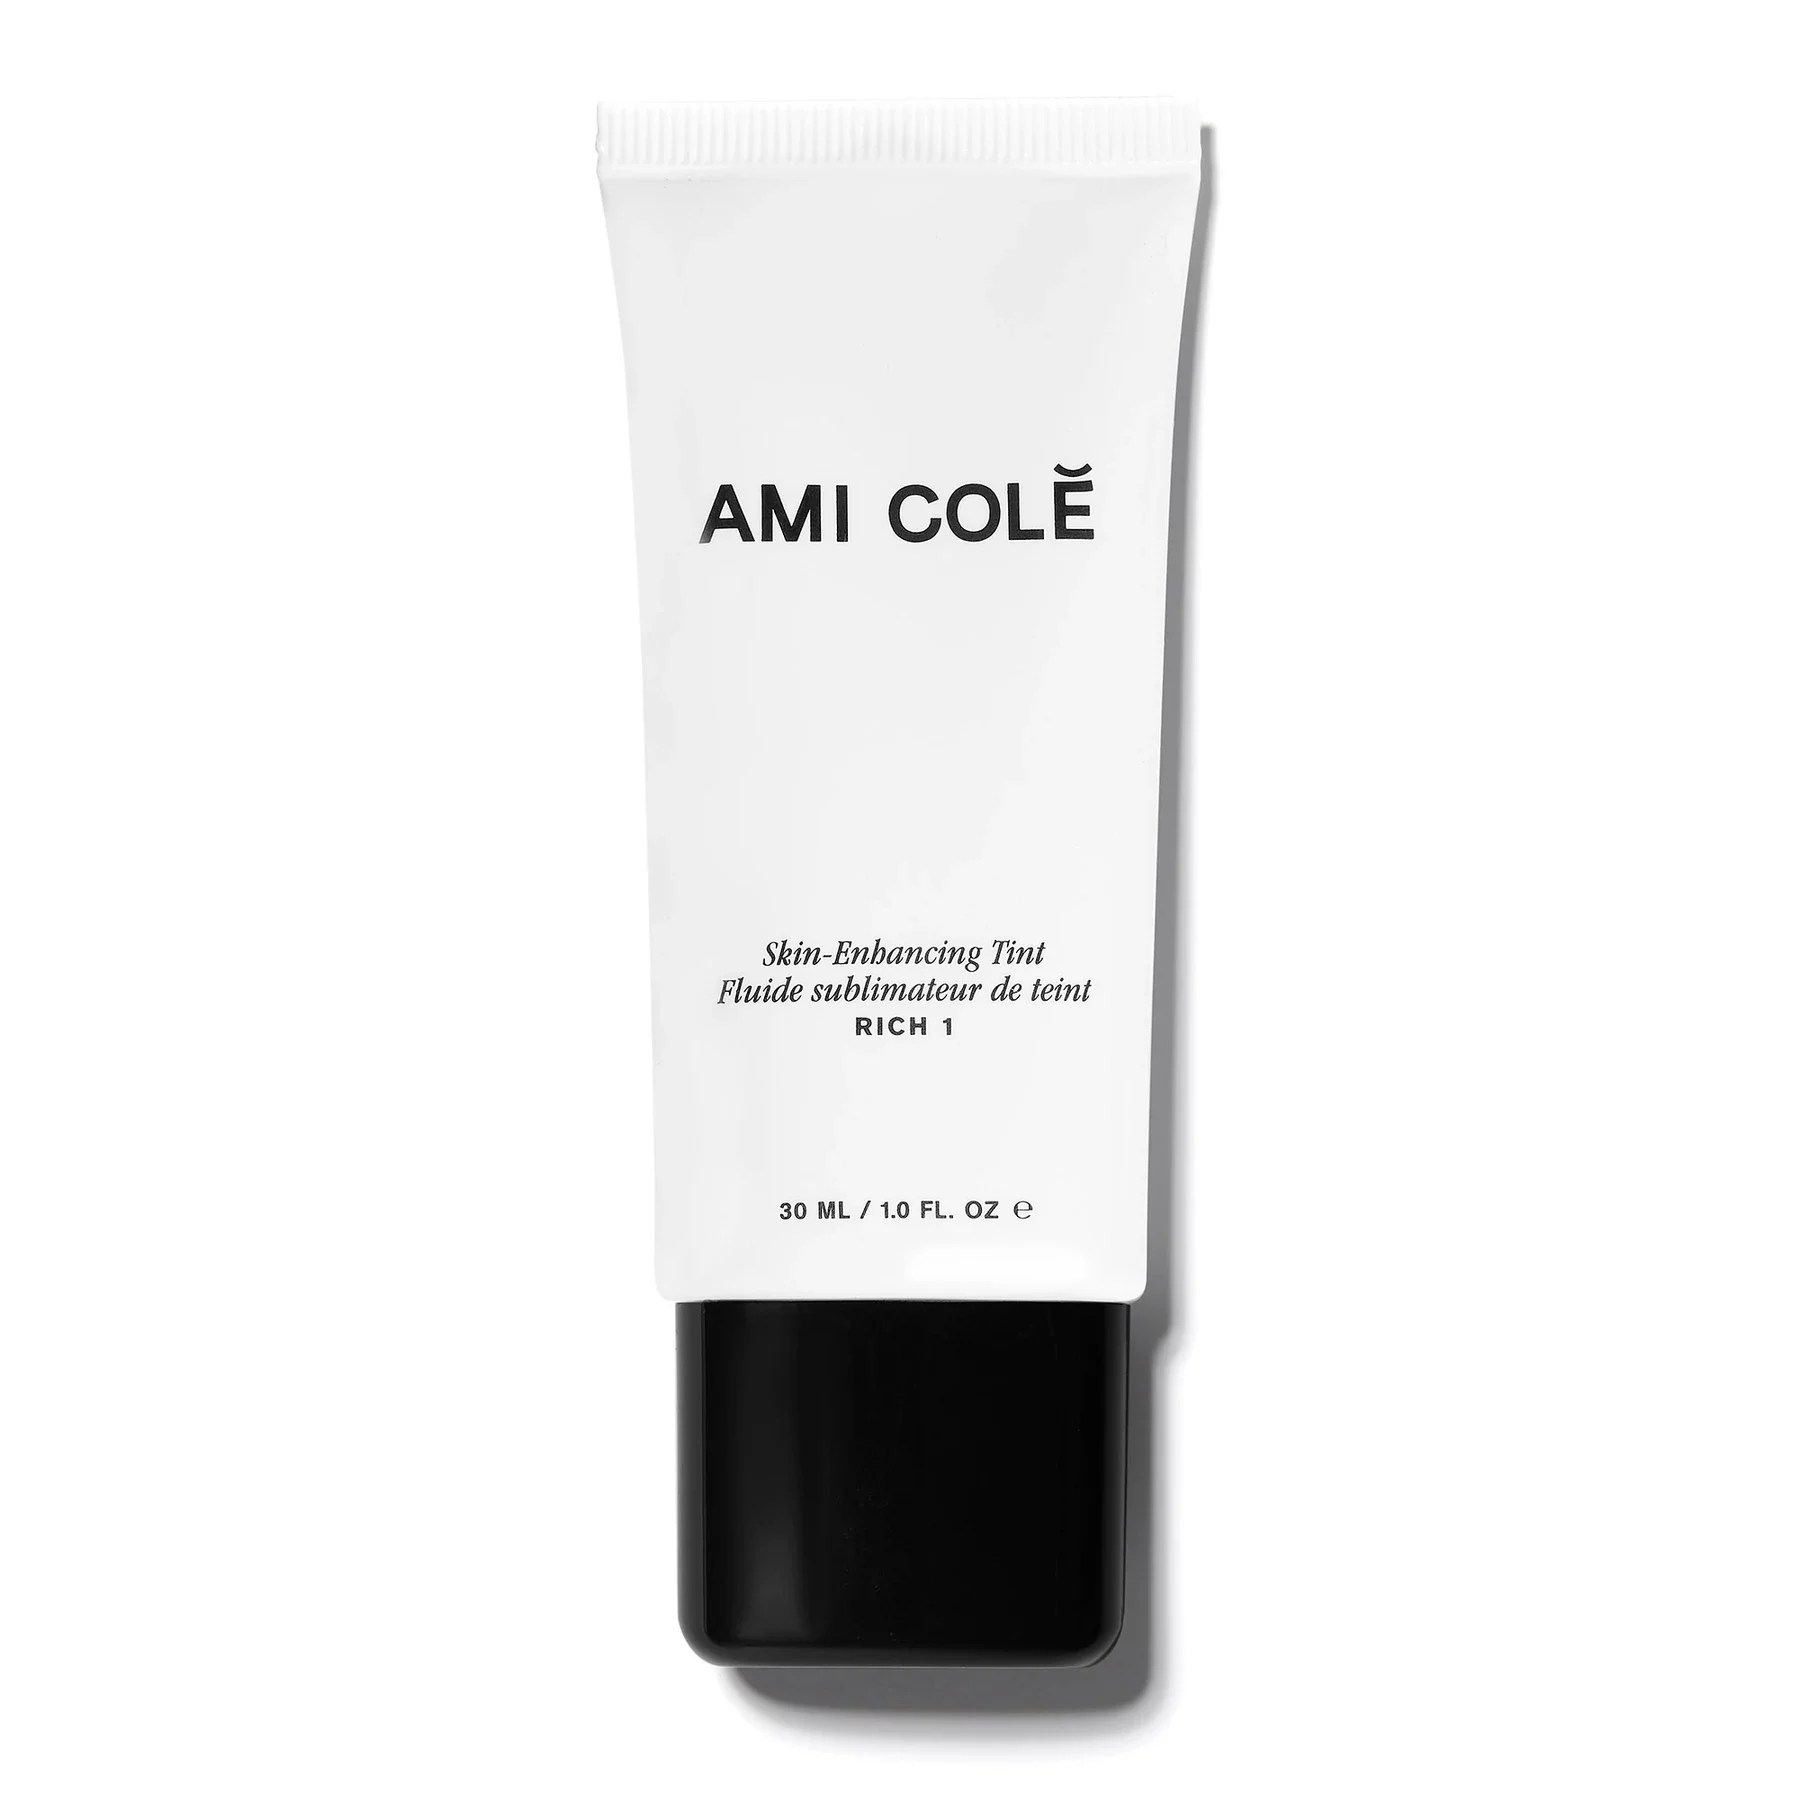 Ami Cole Enhancing Tint, Celebrity MUA Spring Products